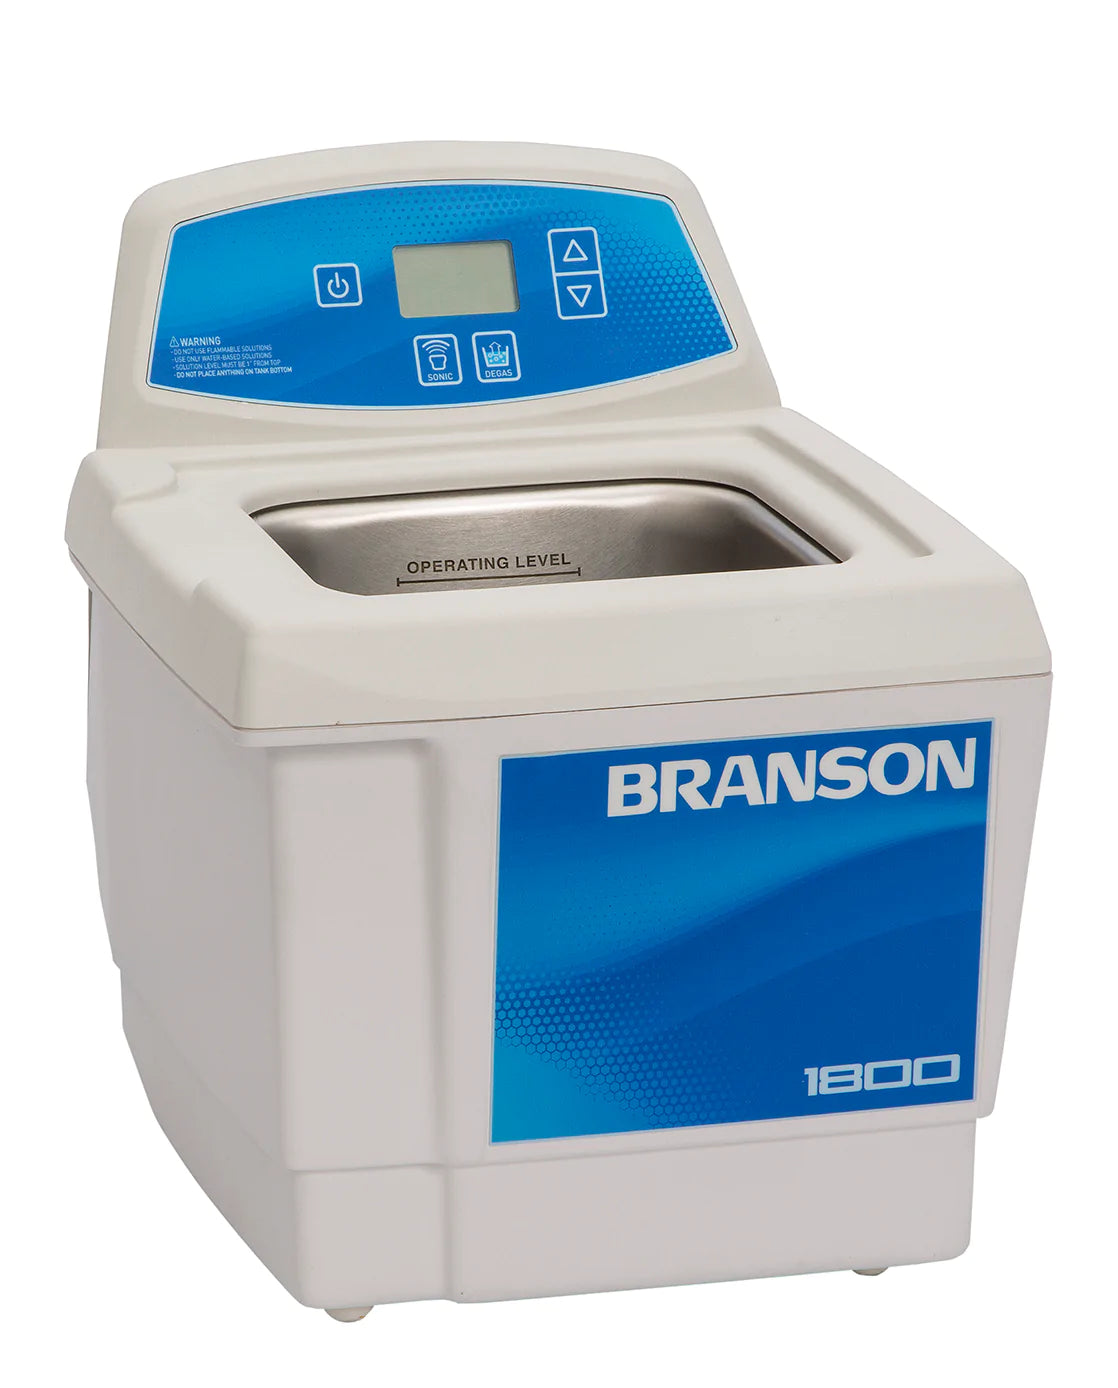 stainless-steel-mesh-basket-for-branson-2500-2800-ultrasonic-cleaners-100-916-334